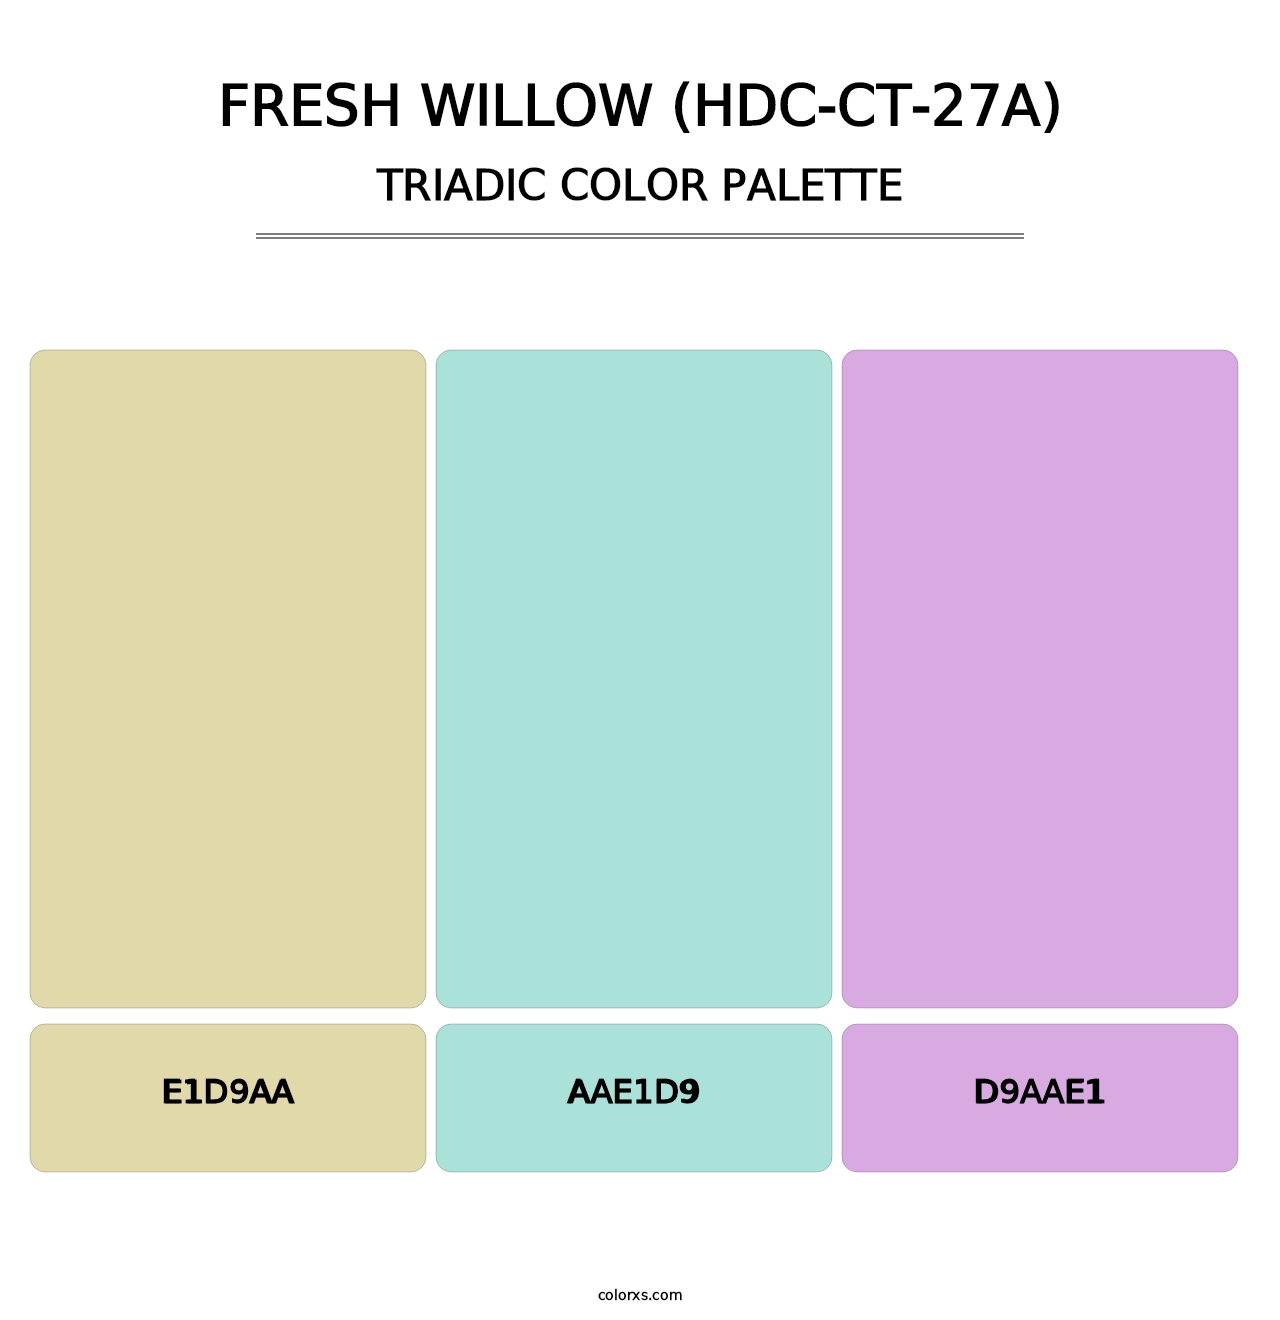 Fresh Willow (HDC-CT-27A) - Triadic Color Palette